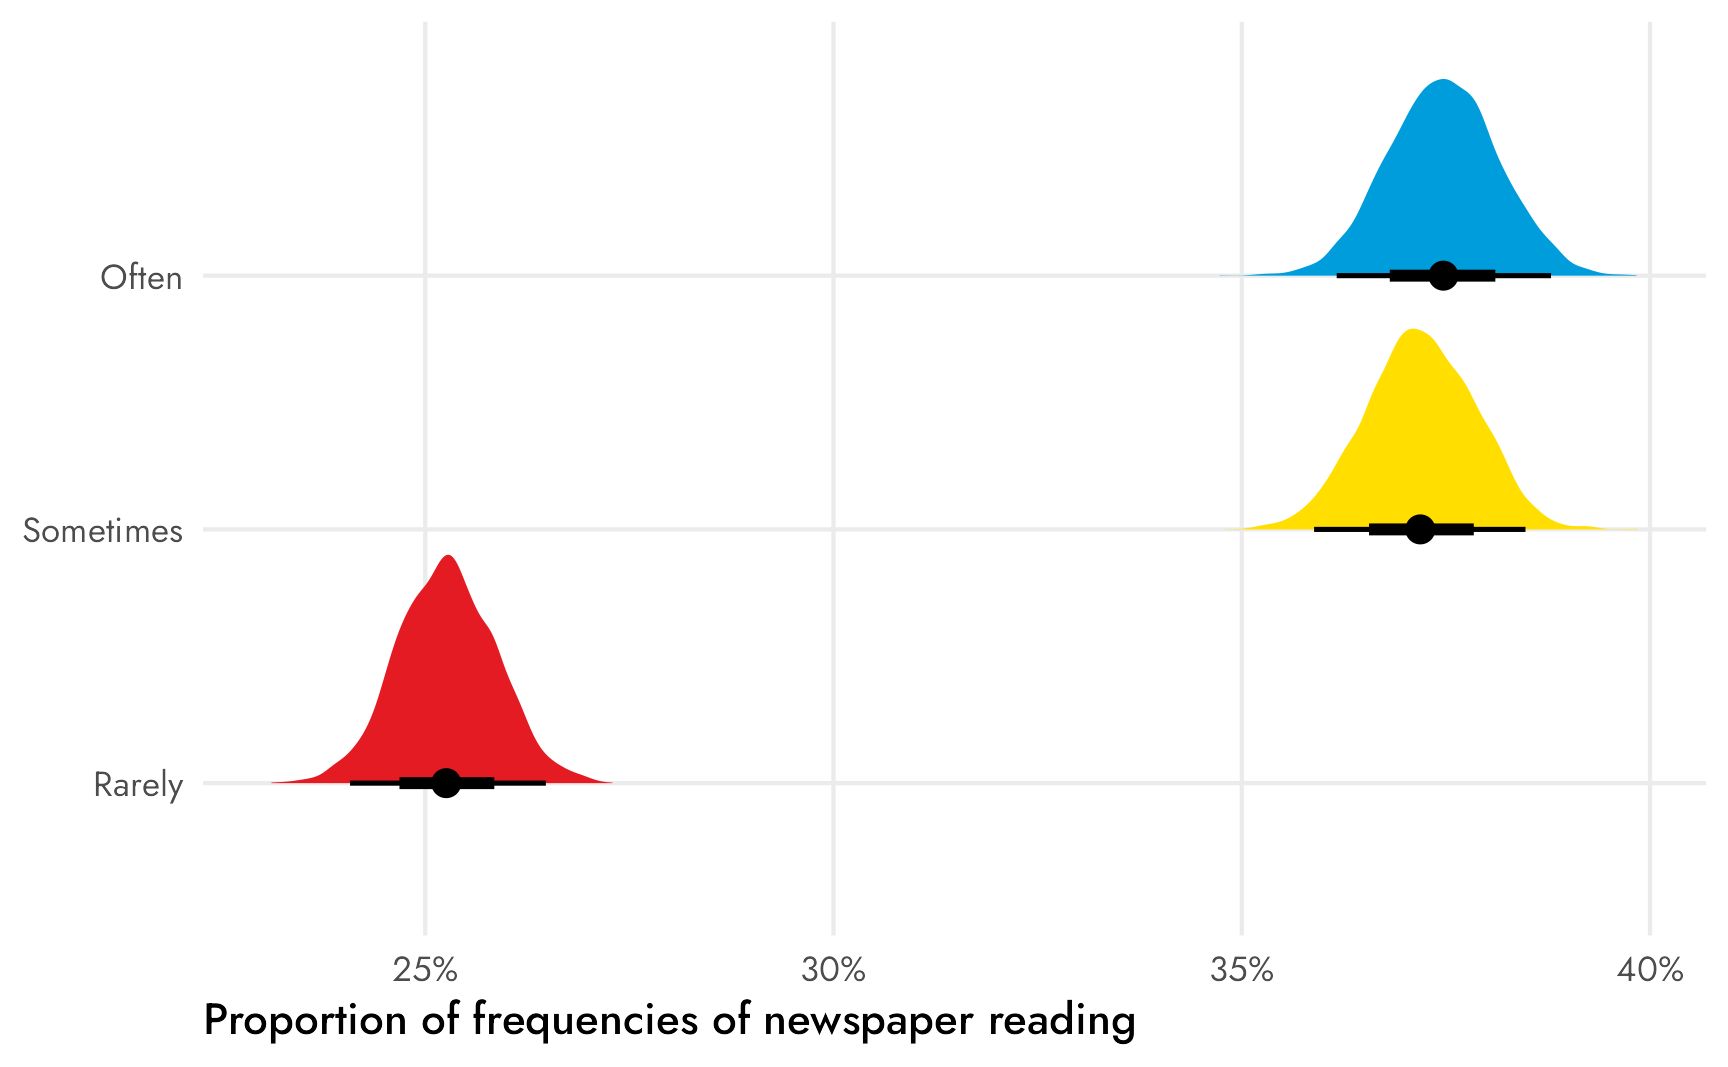 Posterior distributions of the proportions of the frequency of reading newspapers among American students